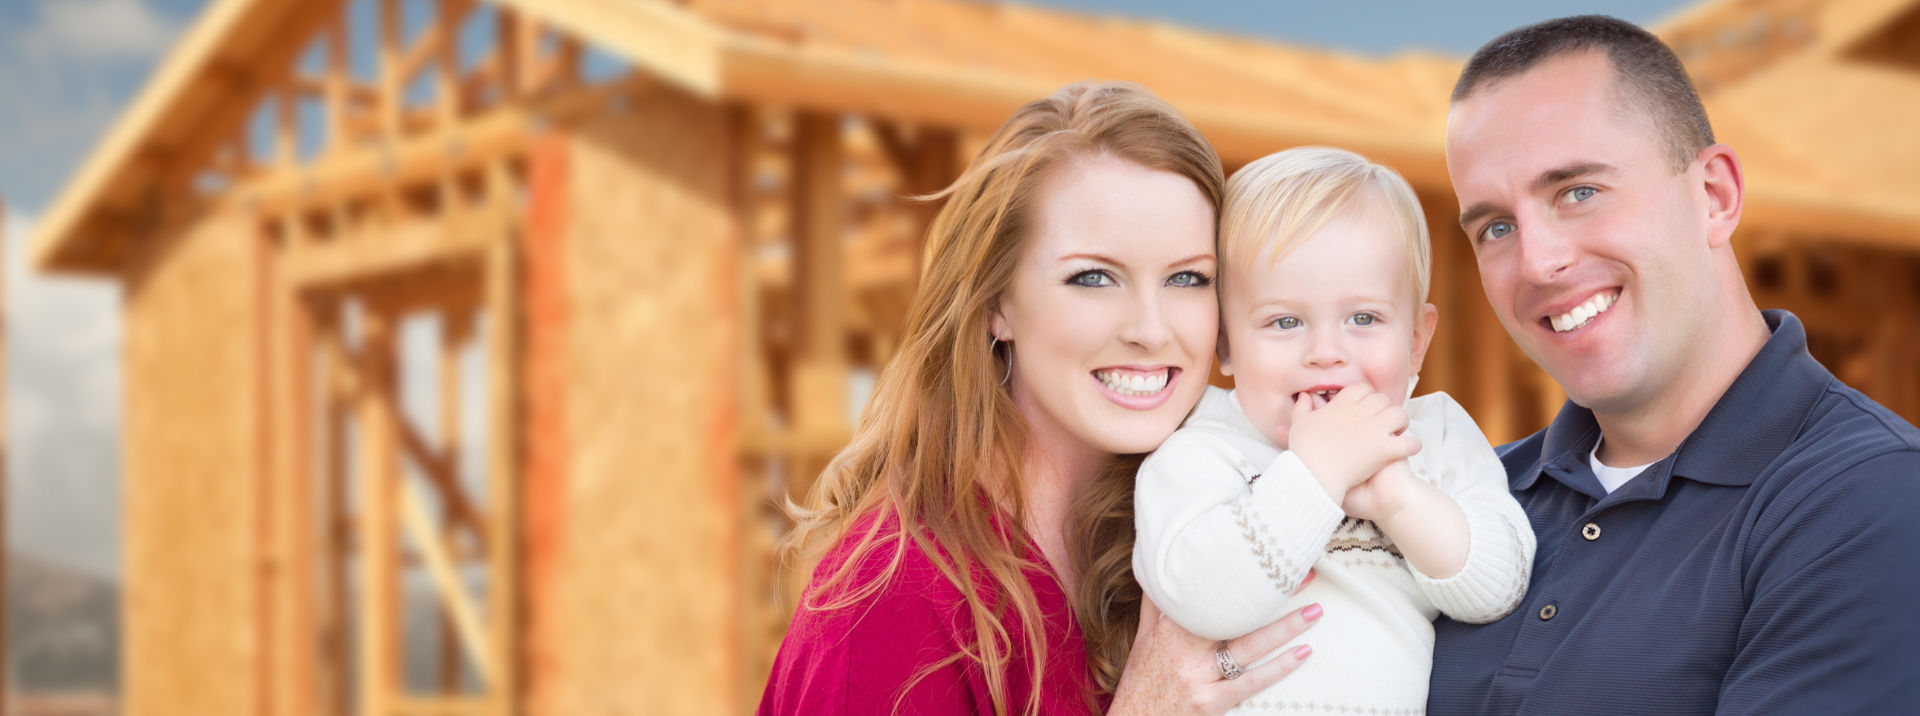 Family holding baby in front of house construction site